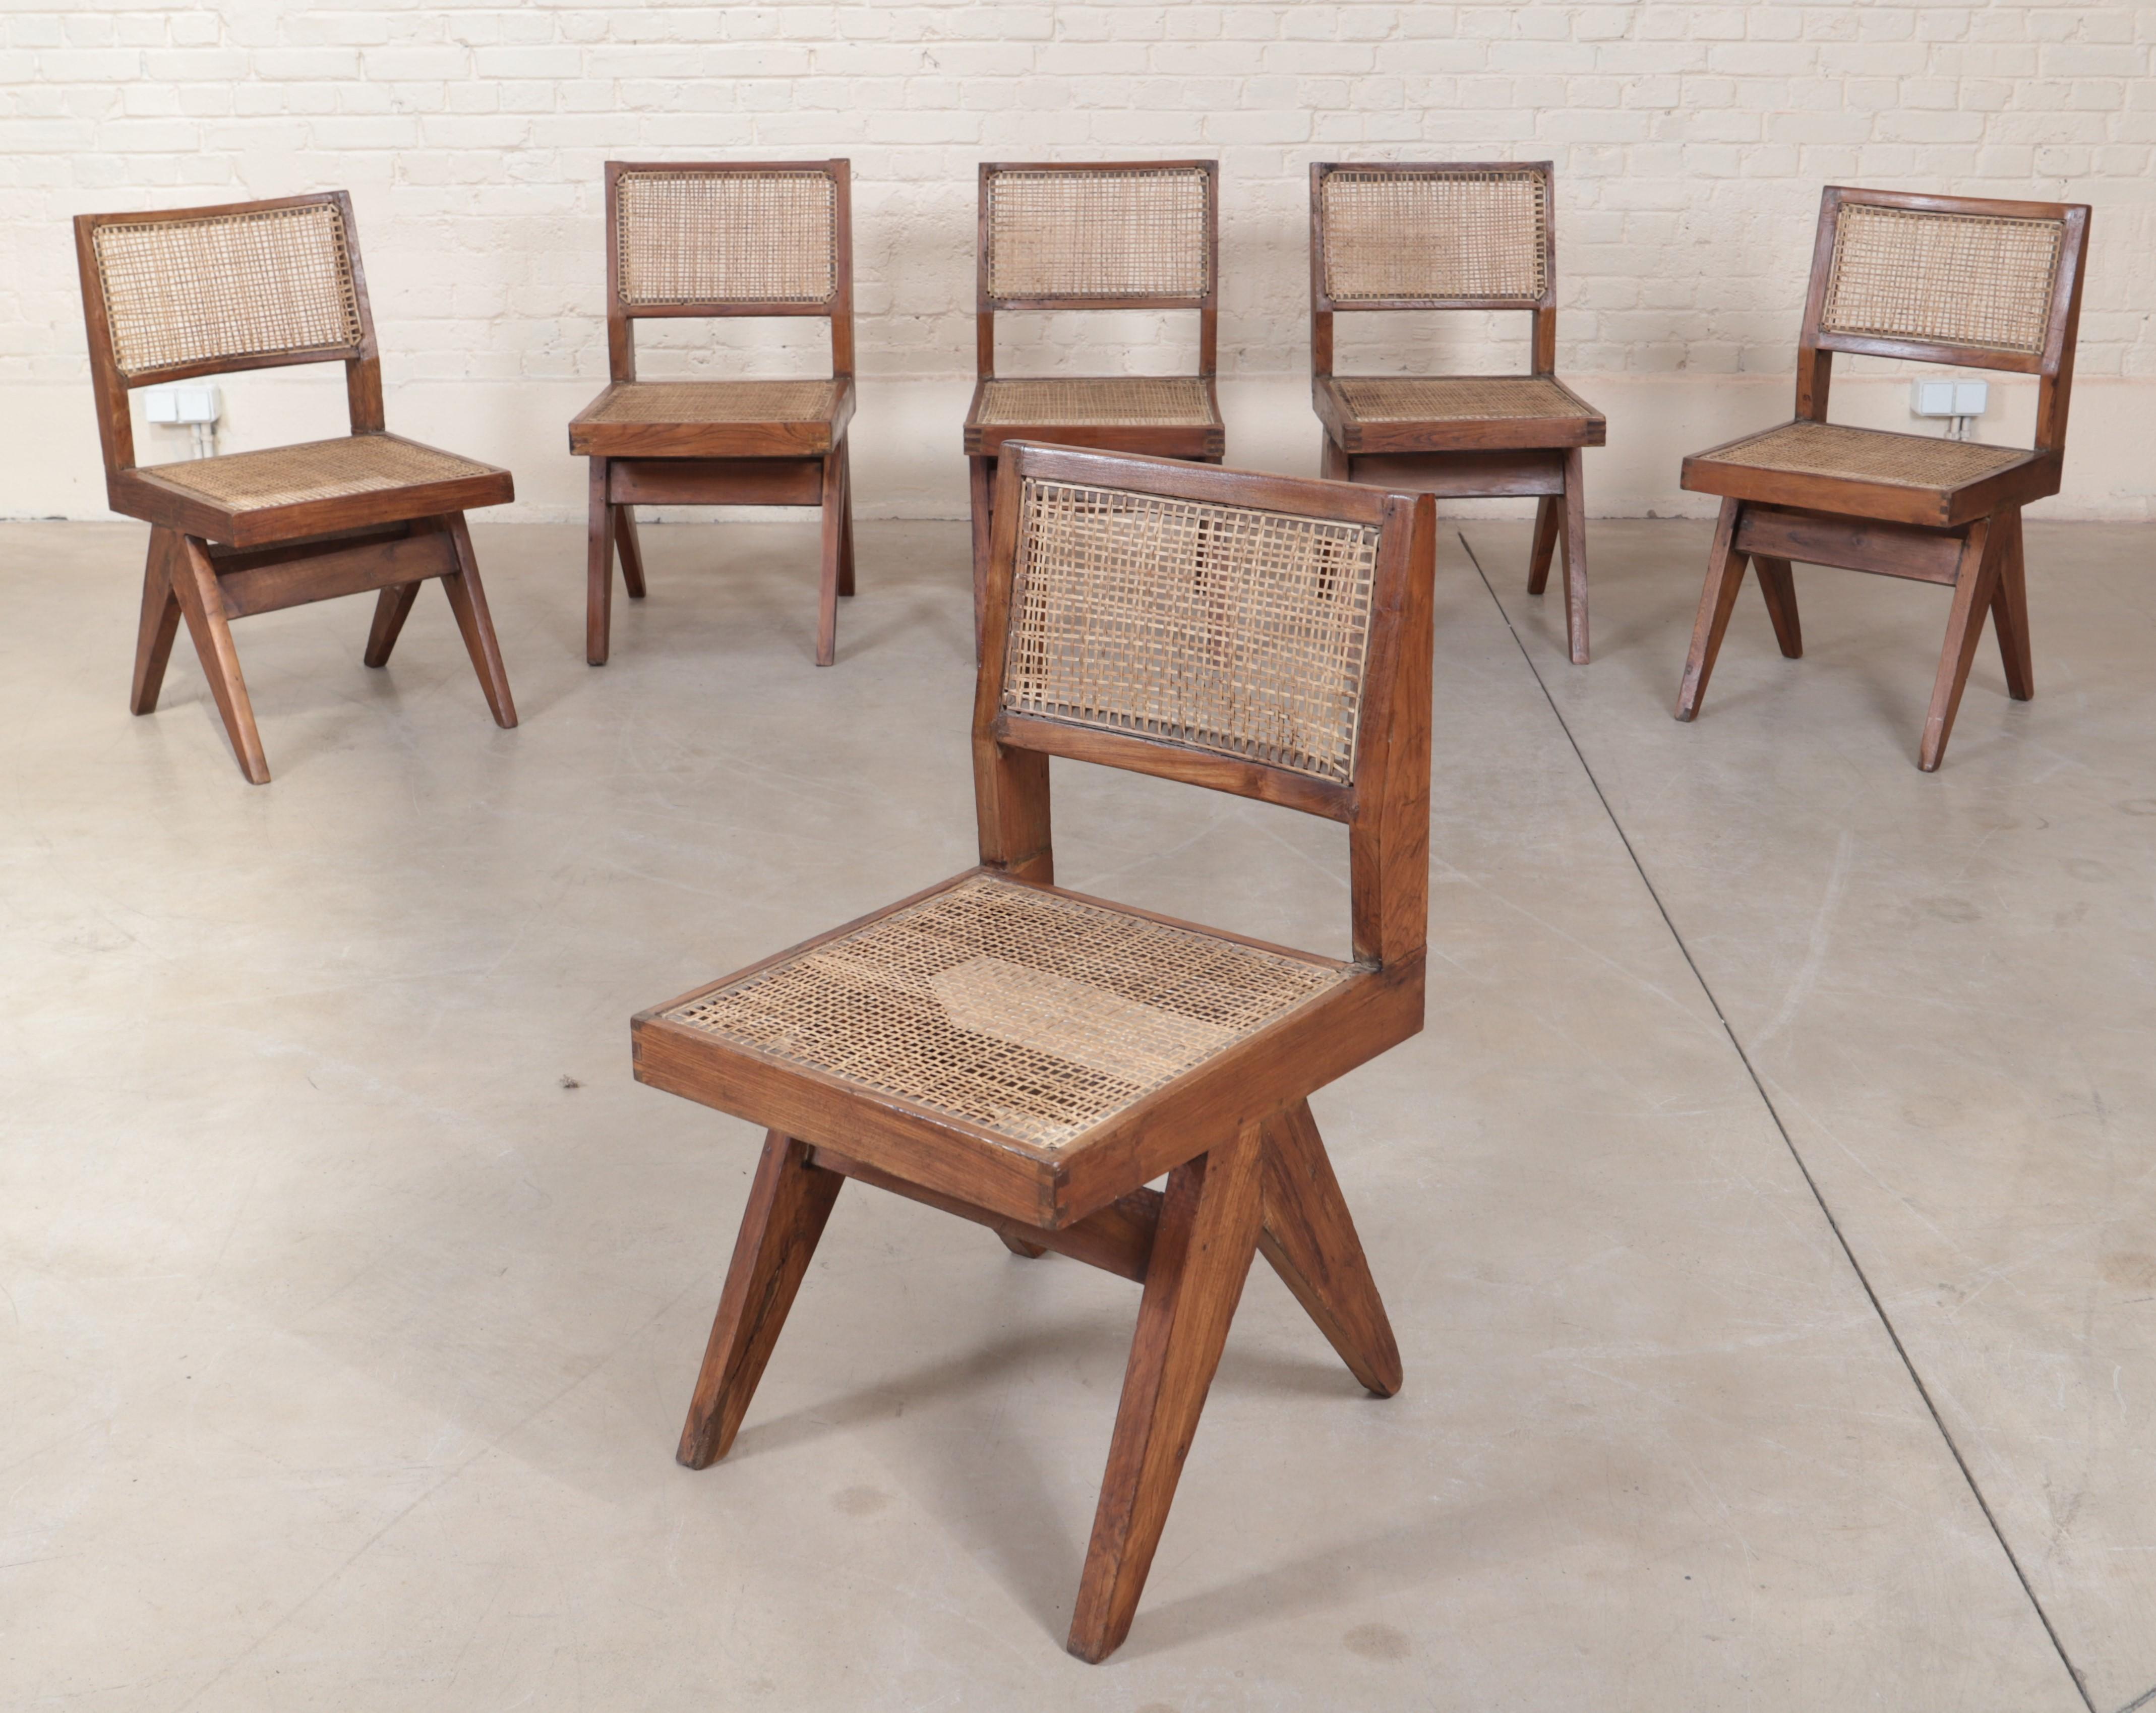 Solid teak chairs with double side legs of compass type joined by two spacers.
Backrest and seat with cane bottom,
circa 1958-1959.

Restoration of use and maintenance.
Provenance: University of Chandigarh, India.
Dimensions: Height 83, width